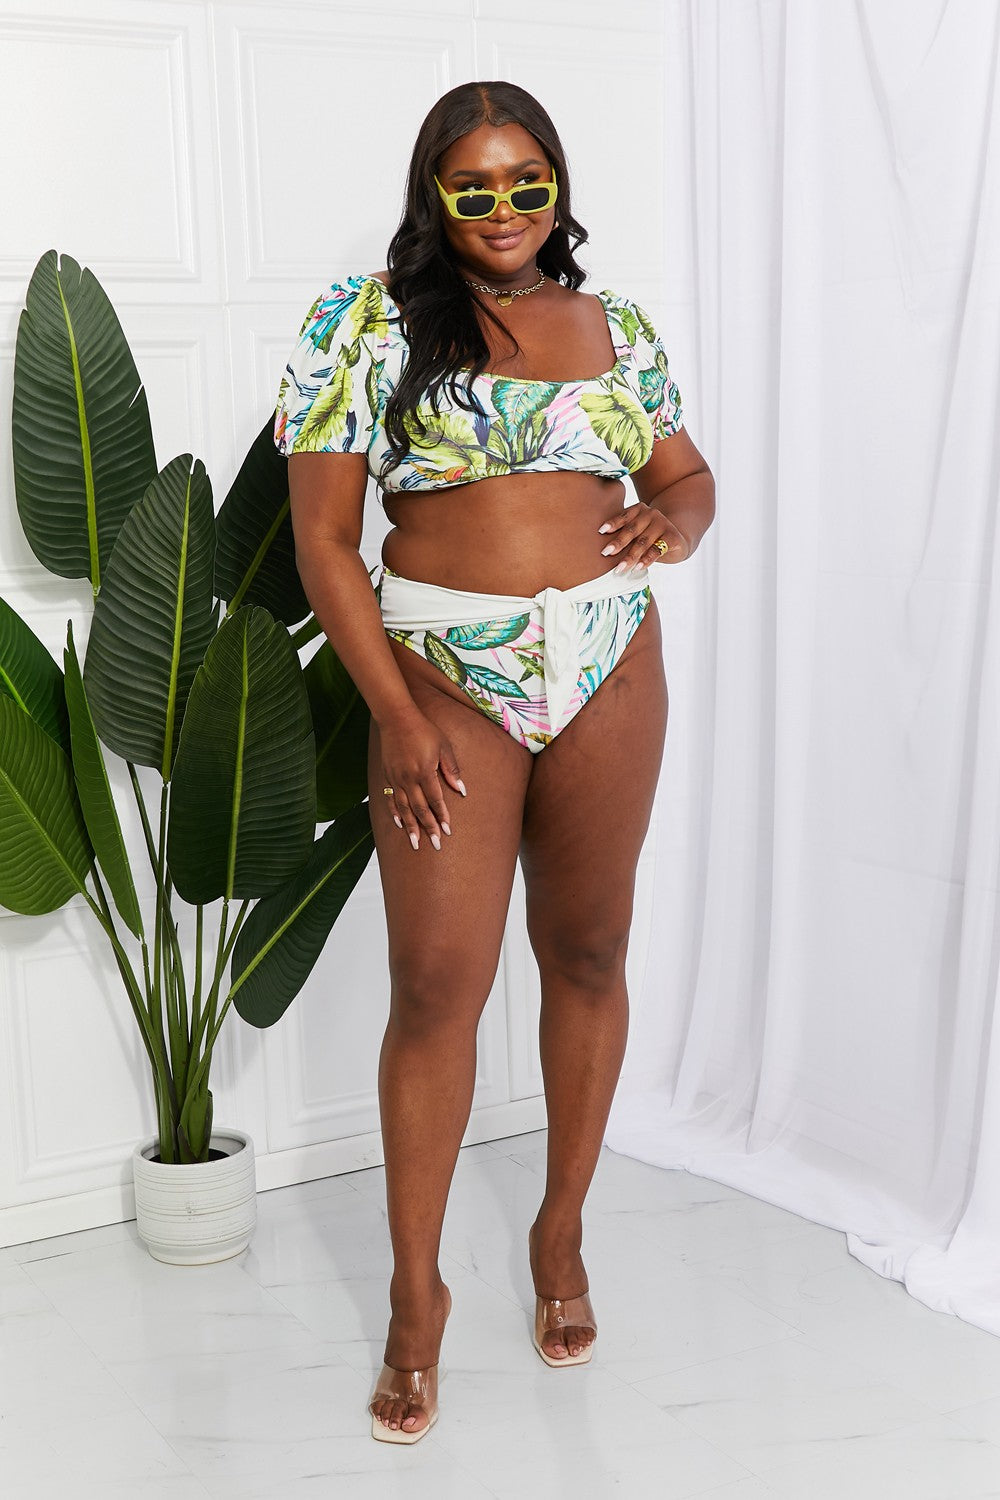 Marina West Swim Vacay Ready Puff Sleeve Bikini in Floral - Online Only